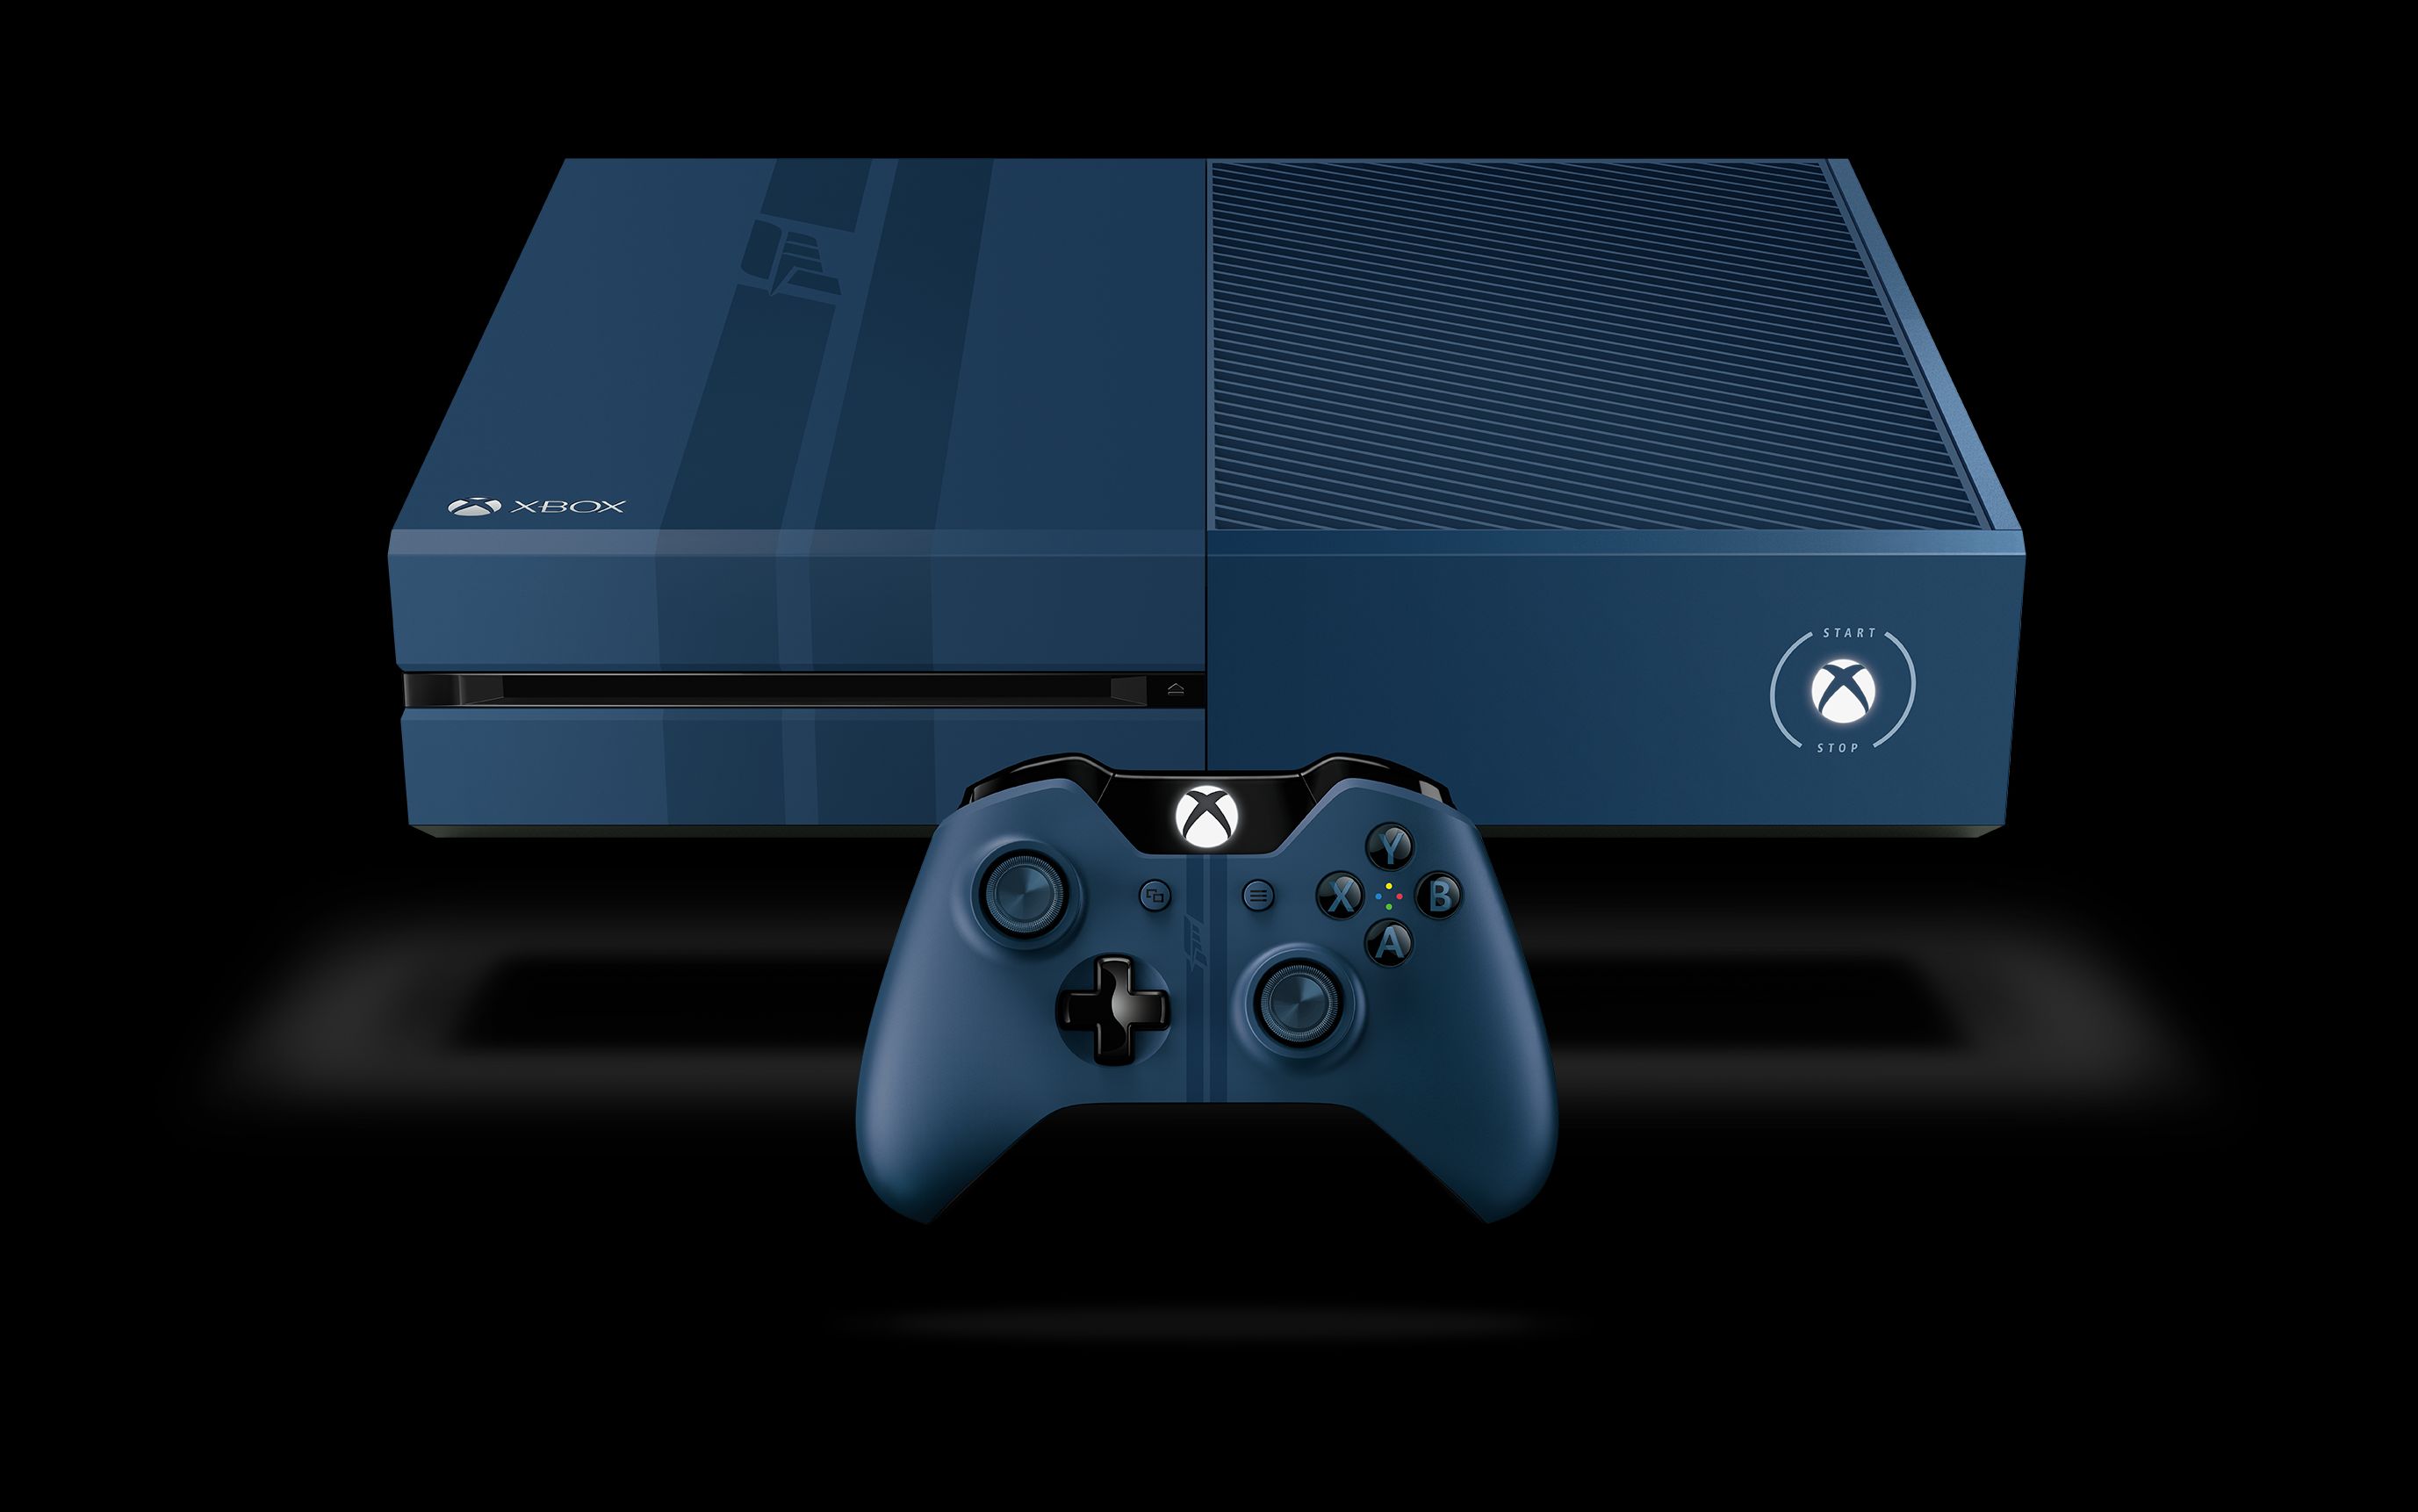 Xbox One Forza Motorsport 6 Limited Edition Announced, Has Special